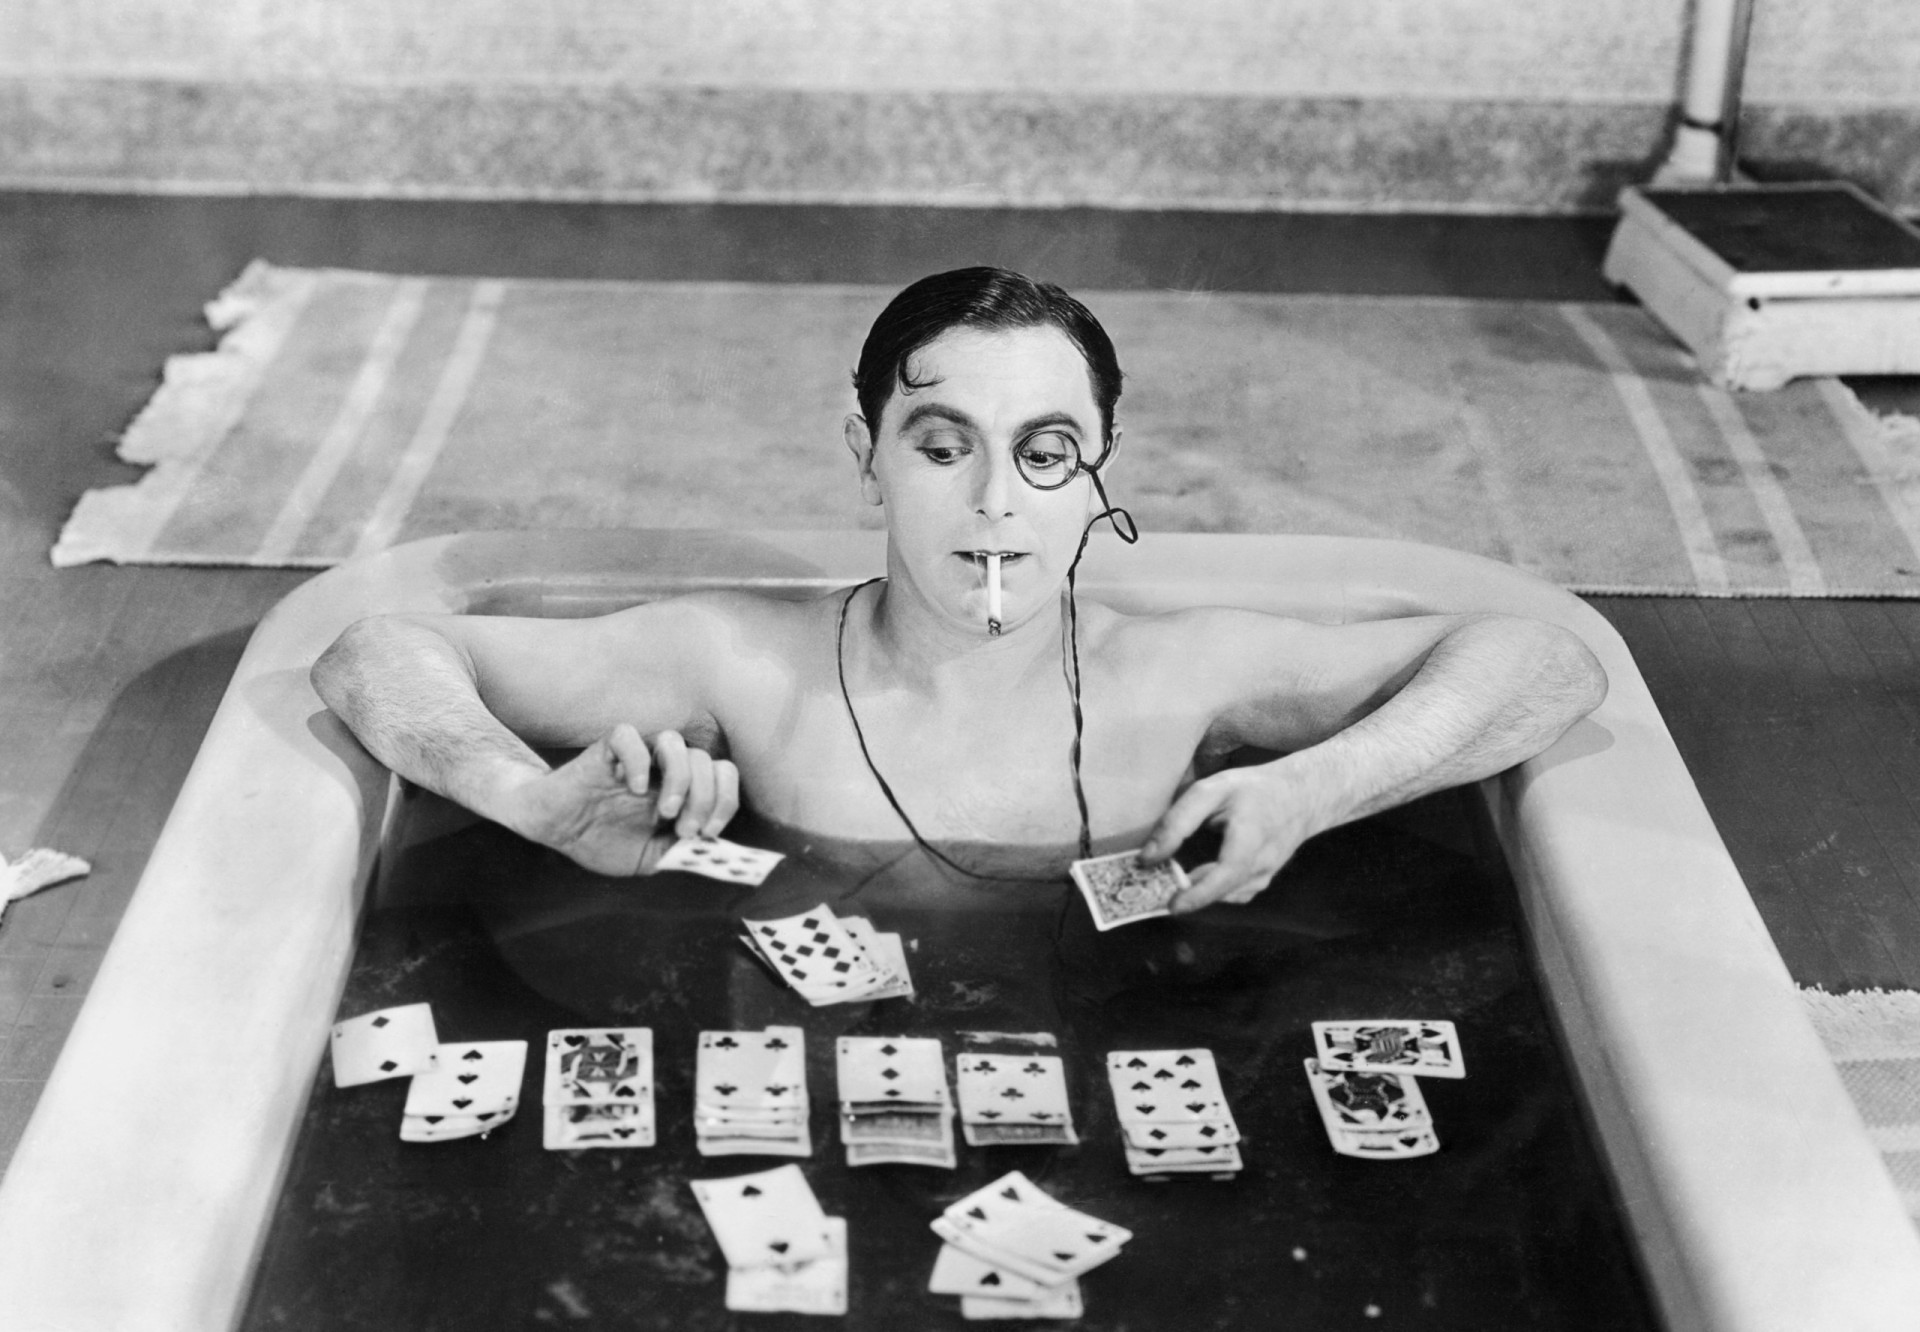 <p>In this scene from 'Fool's Luck,' a silent comedy film directed by Roscoe "Fatty" Arbuckle, English actor Lupino Lane plays solitaire in the bath. His cousin was the actress, writer, and director Ida Lupino, one of the most prominent female filmmakers working in 1950's Hollywood.</p><p>You may also like:<a href="https://www.starsinsider.com/n/395845?utm_source=msn.com&utm_medium=display&utm_campaign=referral_description&utm_content=546036en-en"> Say cheese! The most dazzling celebrity smiles</a></p>